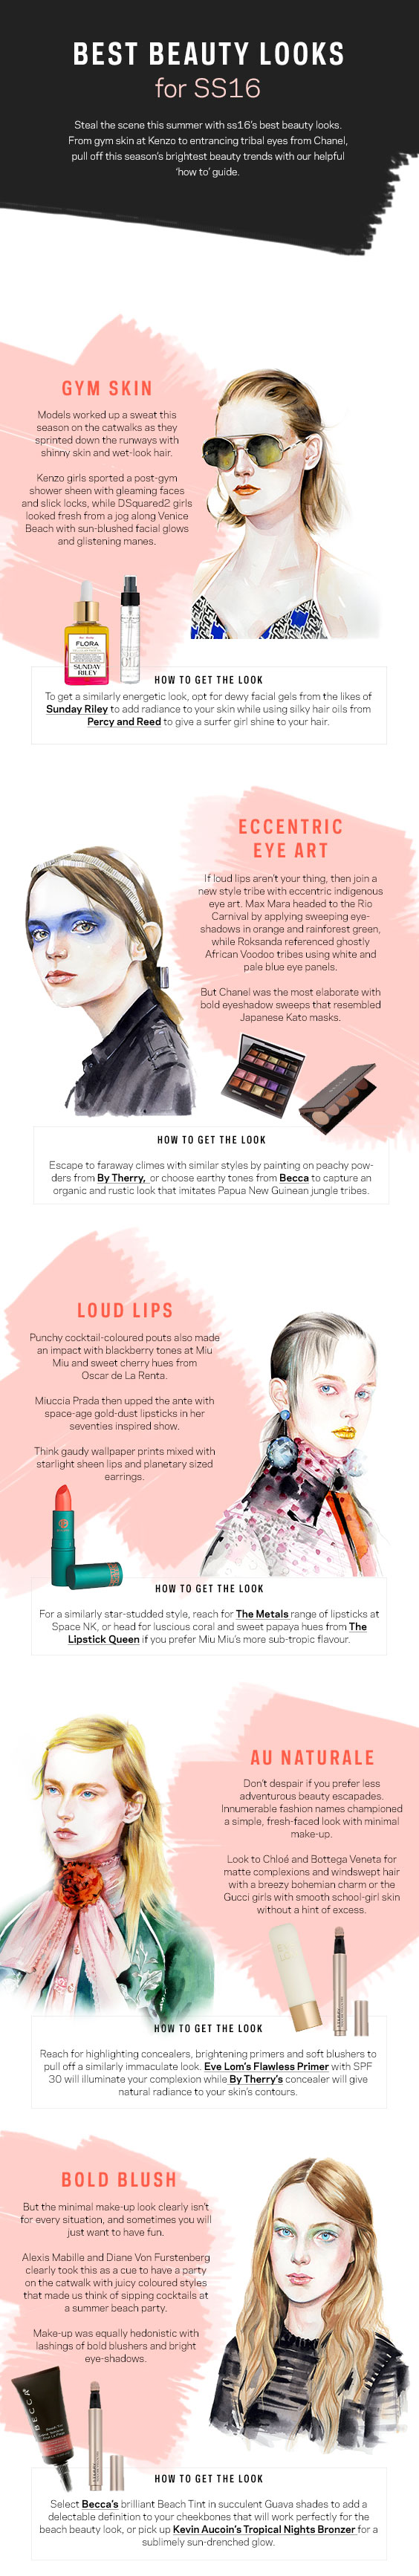 Beauty Infographic 2016